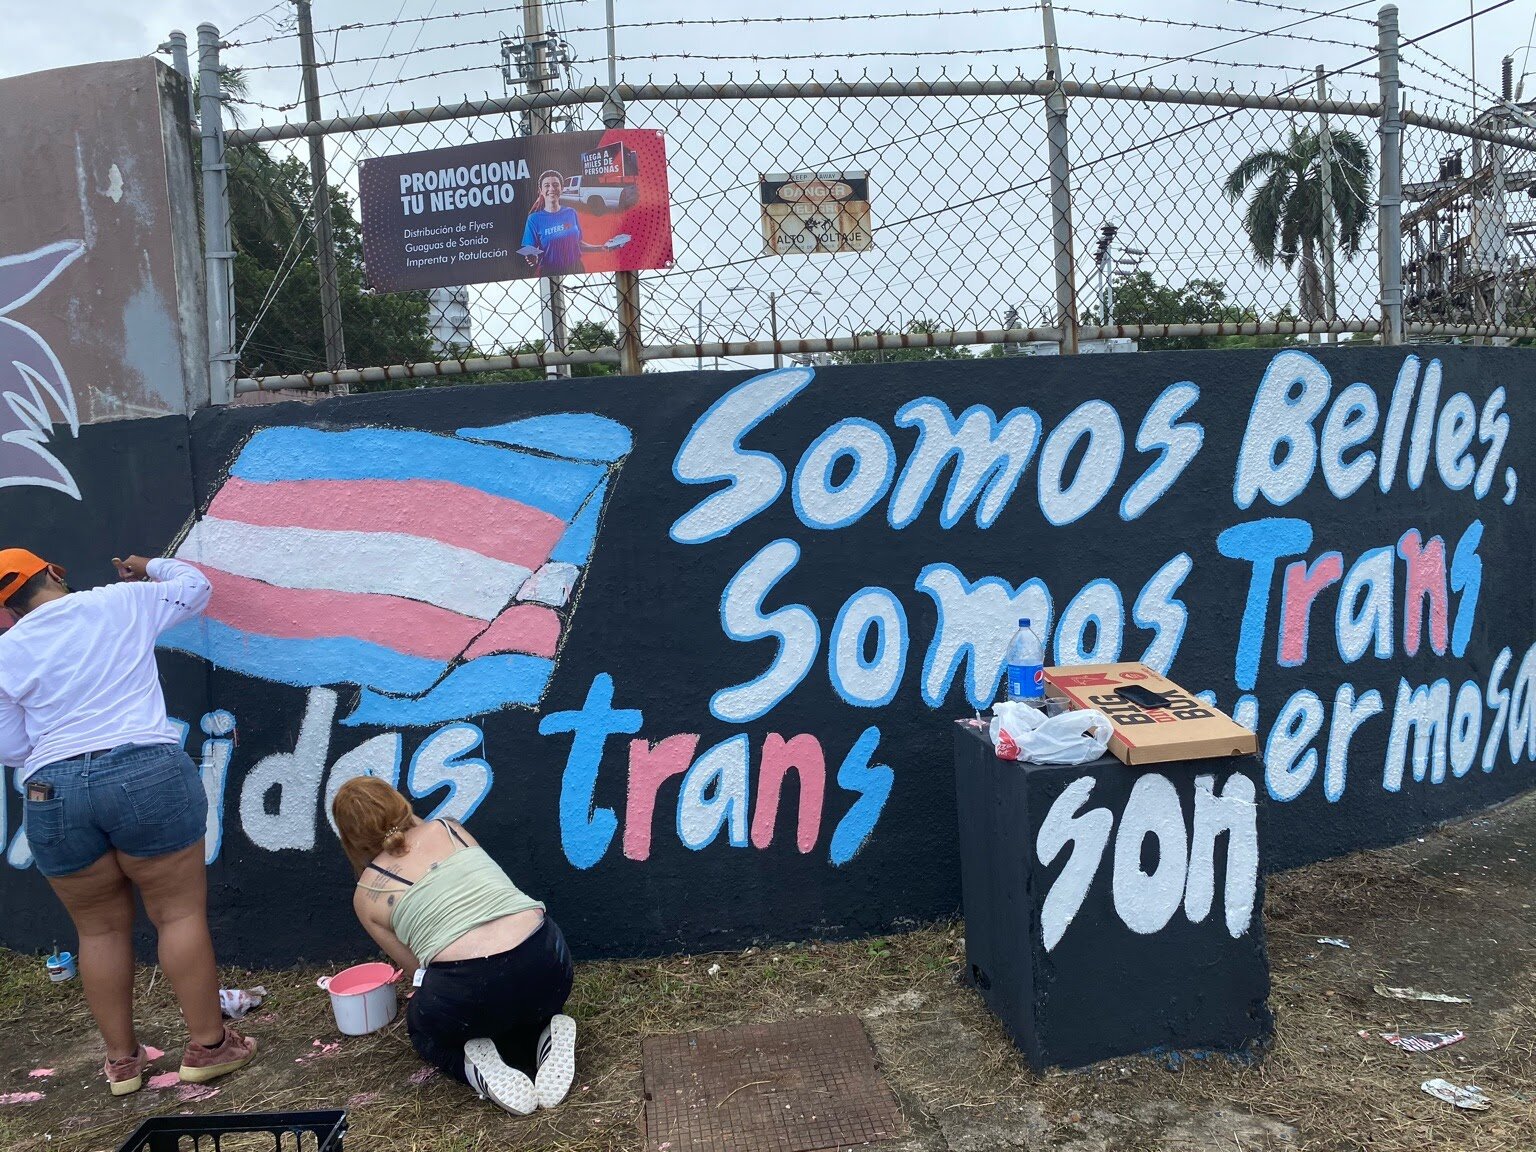 A mural in honor of trans victims of violence went up last fall in San Juan. Photo courtesy of Marielle De Leon